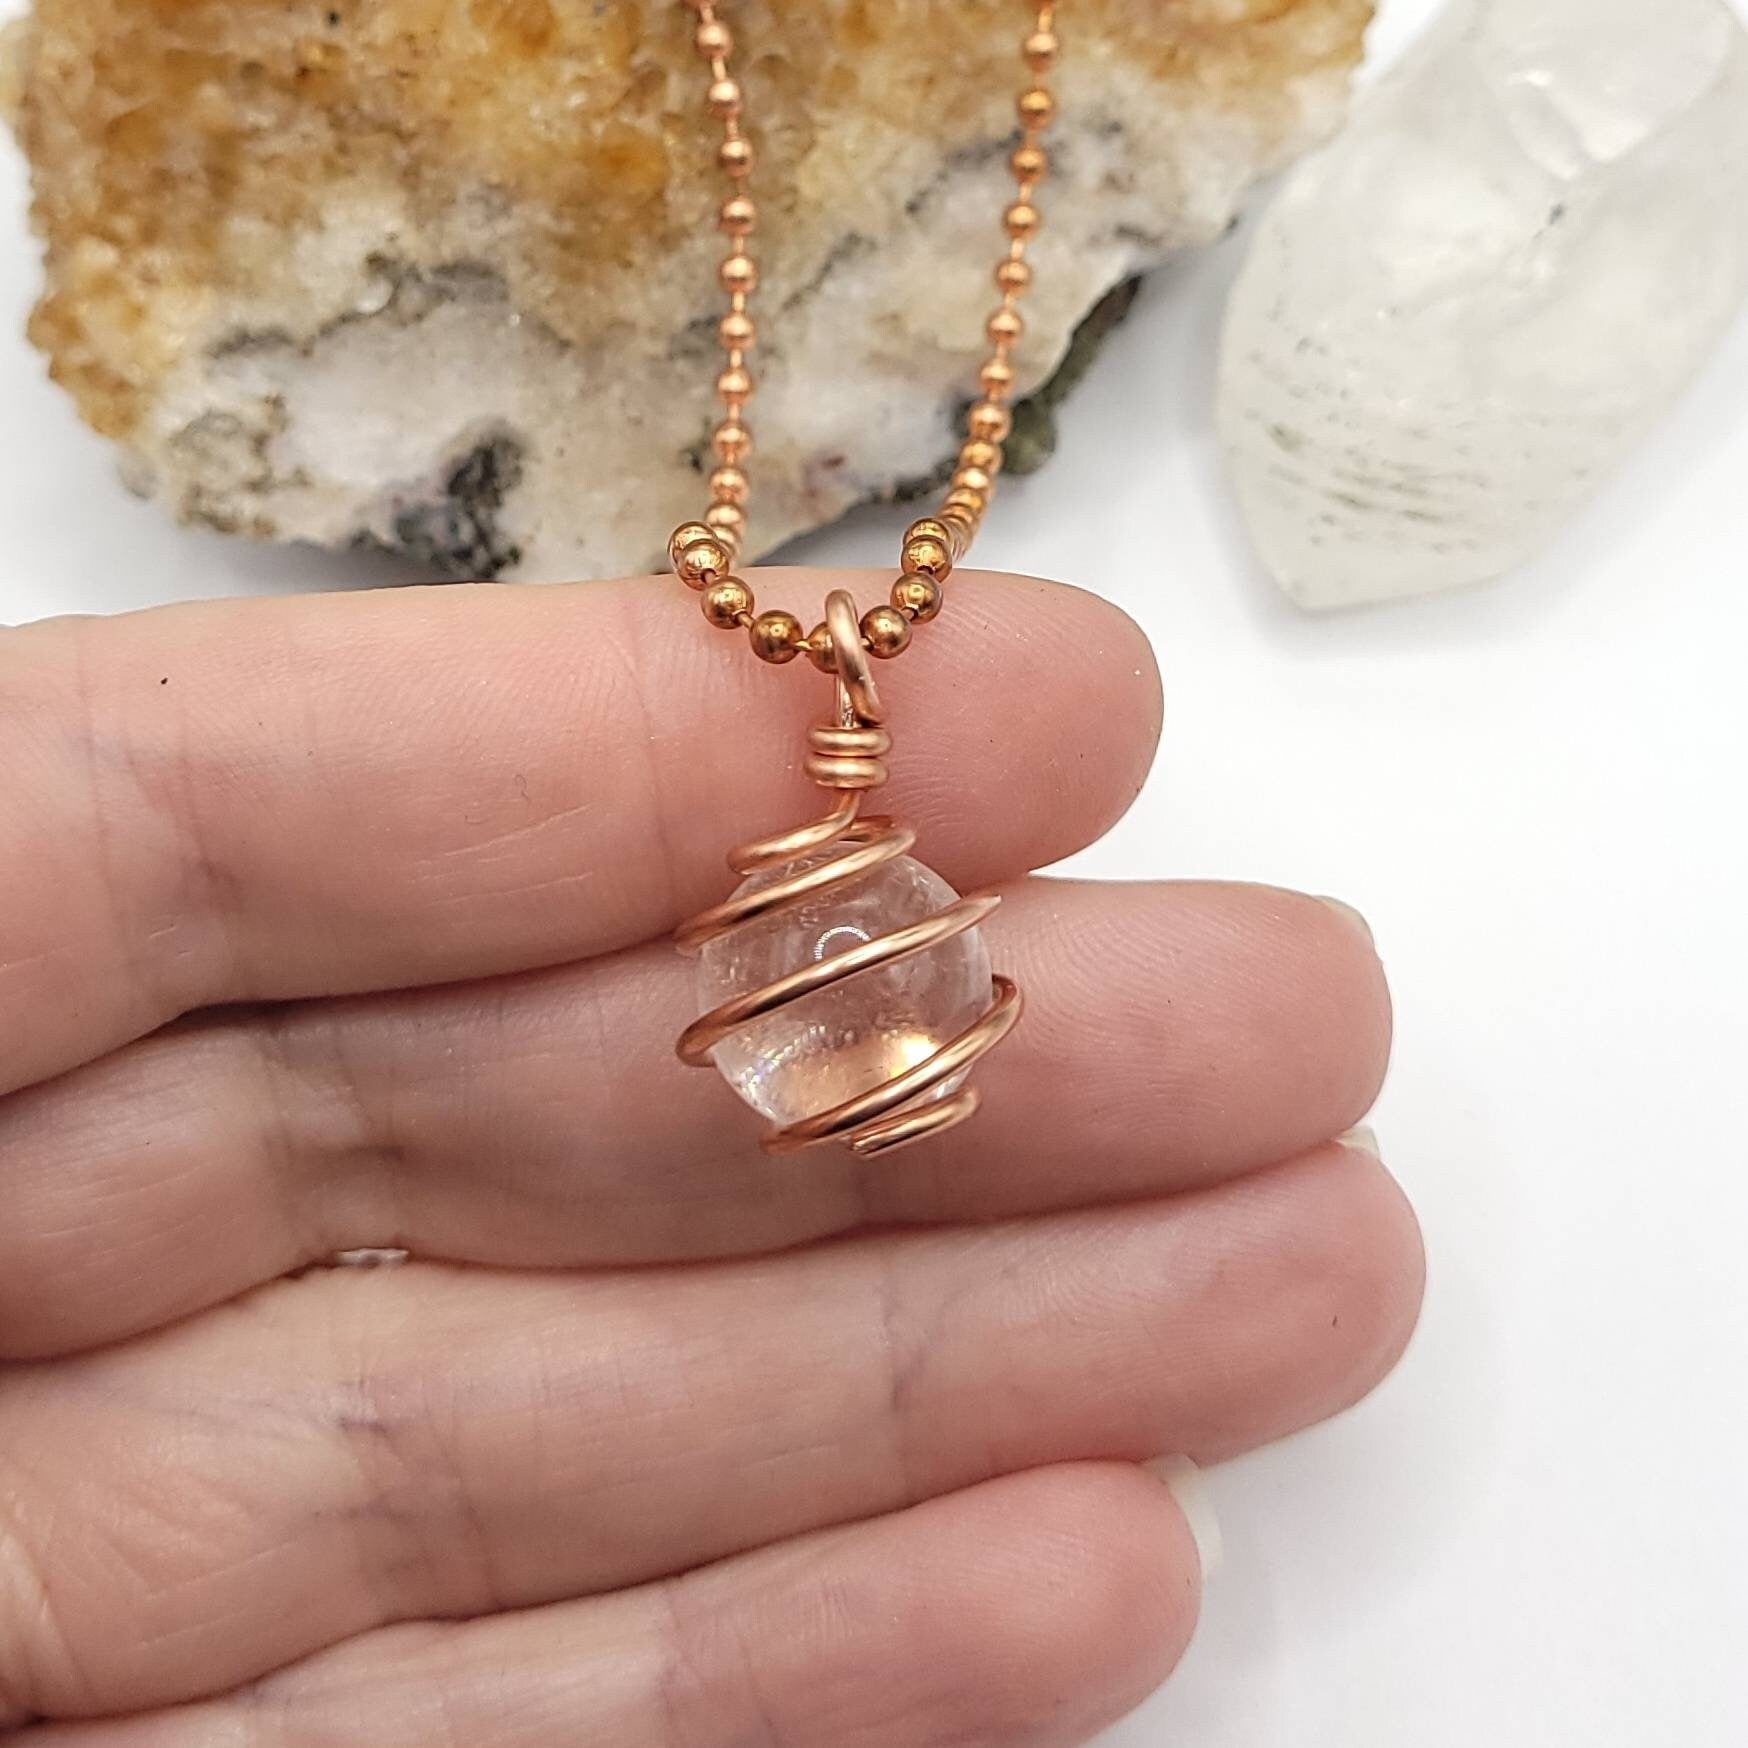 Clear Quartz Sphere Necklace, Wire Wrapped Clear Quartz Pendant, Crystal Jewelry, Crystal Pendant